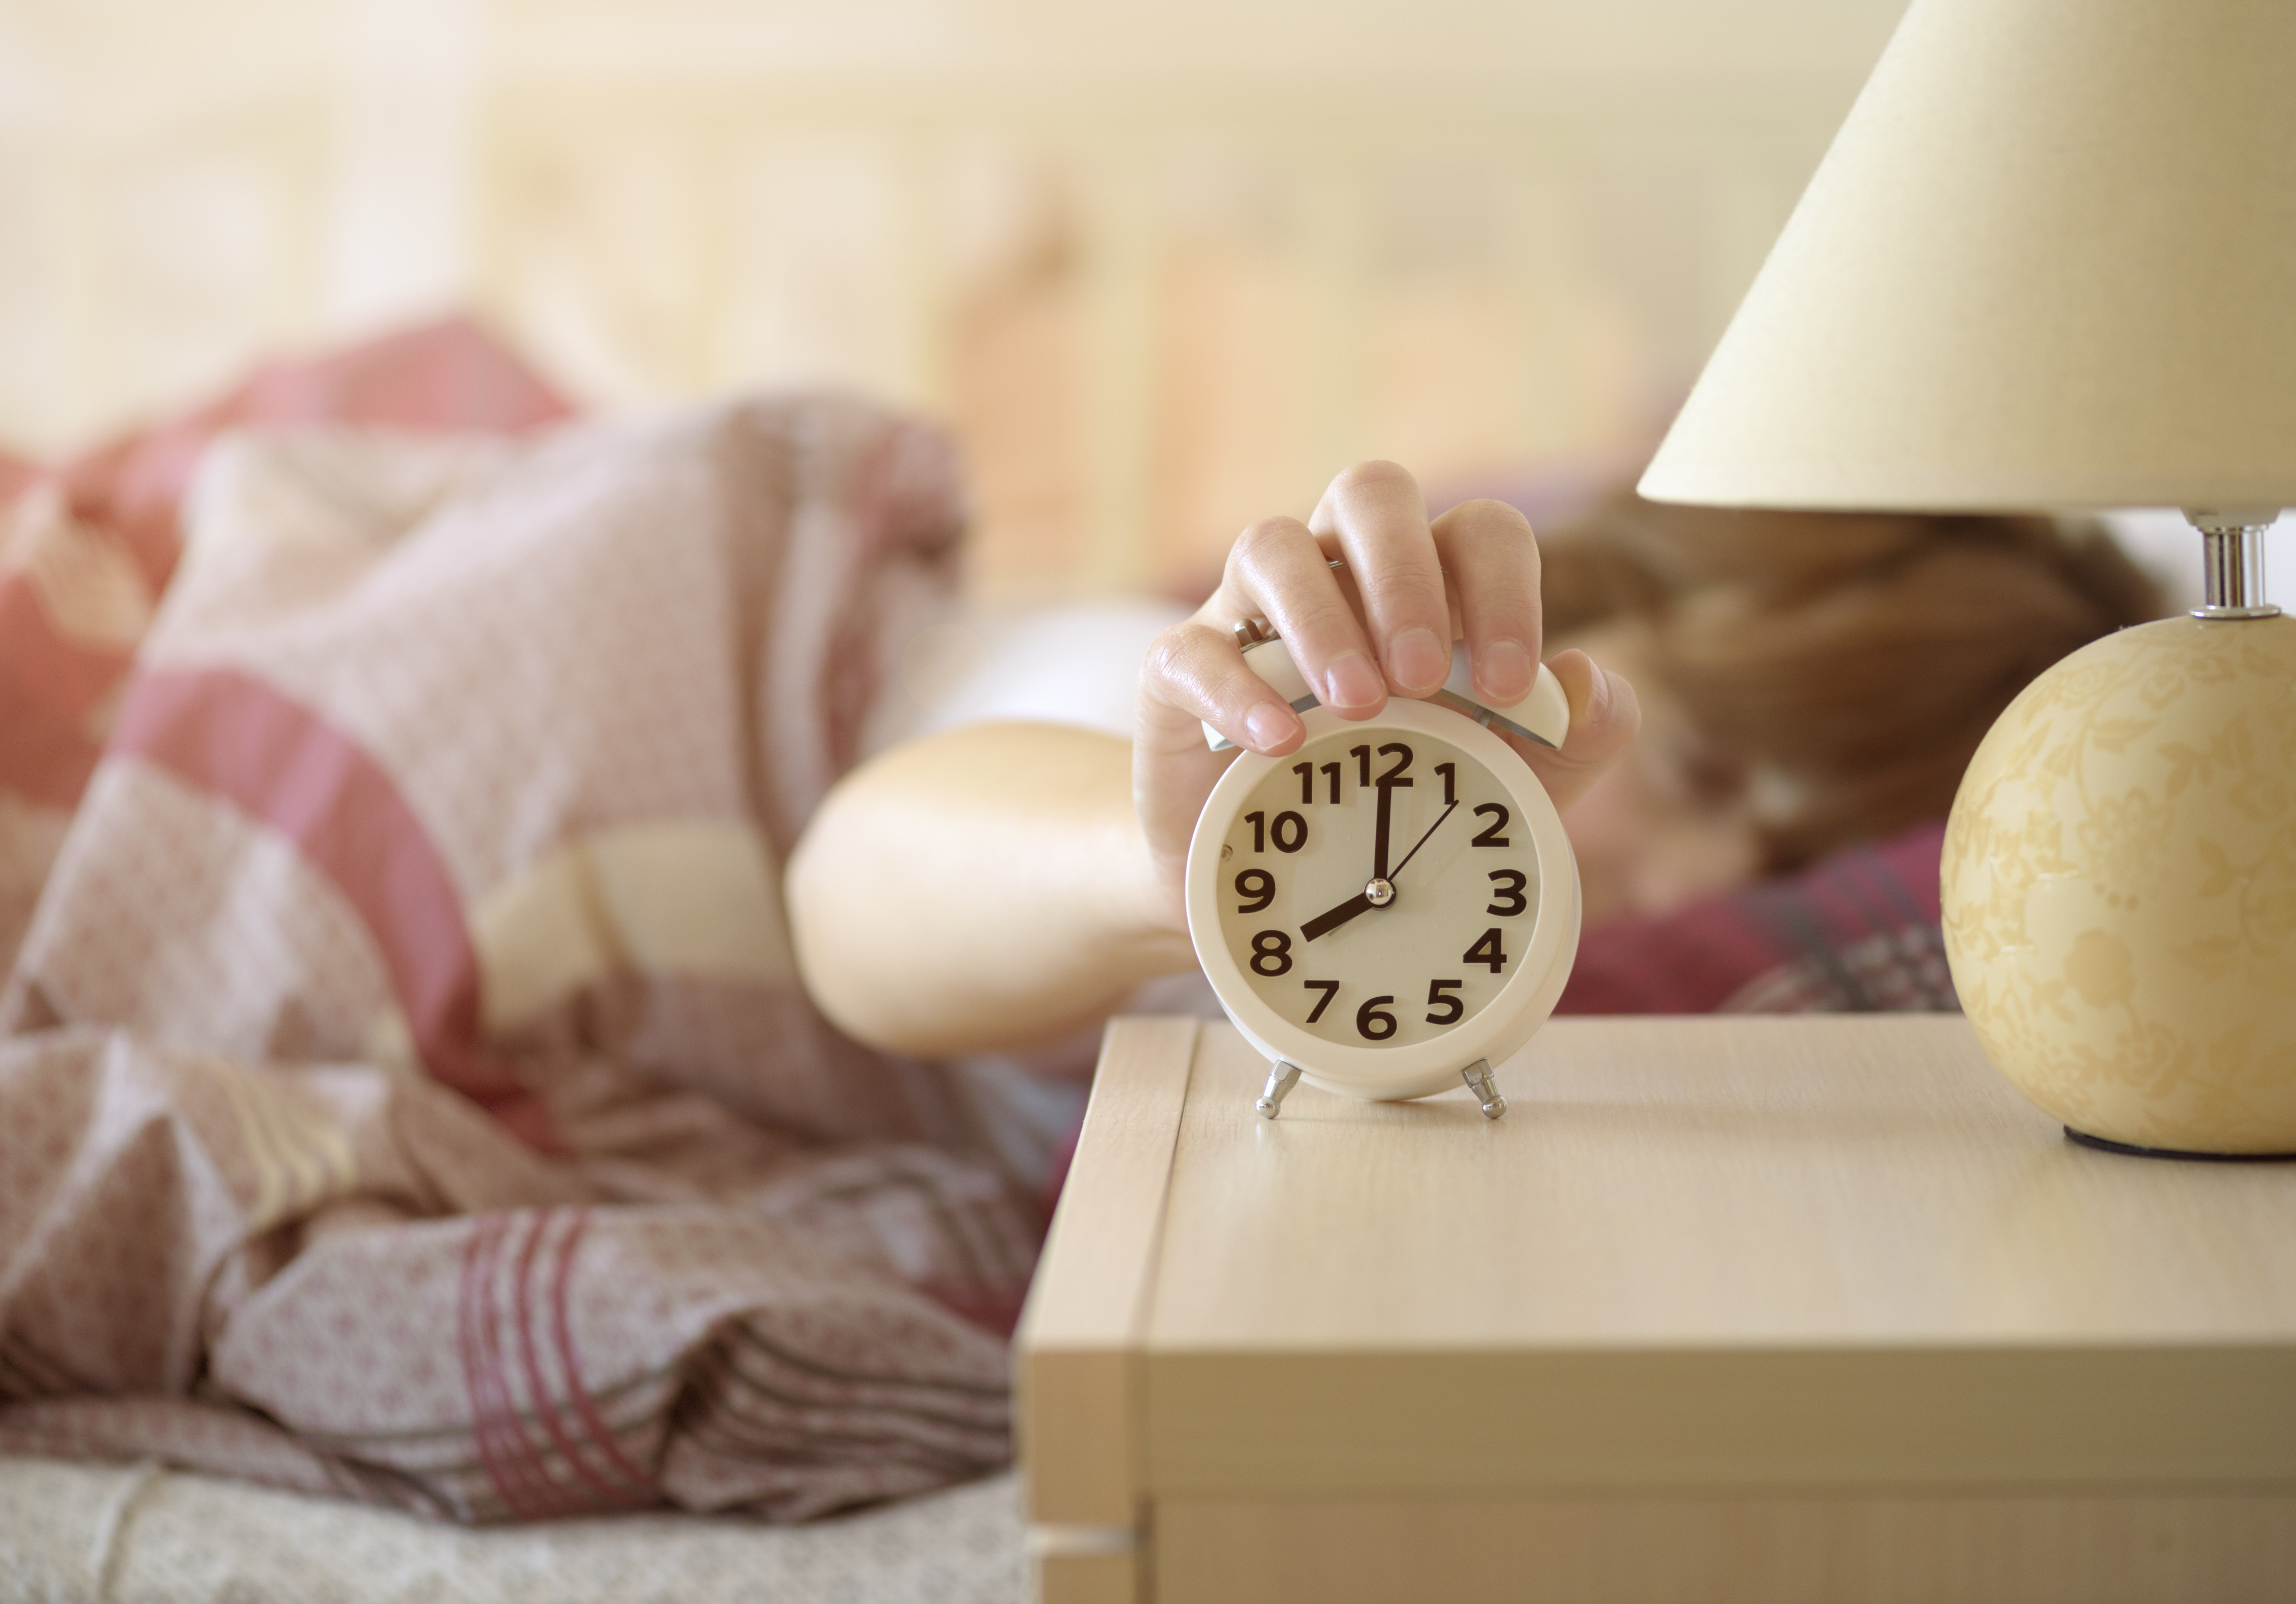 Woman turns off the alarm clock waking up in the morning from a call. | Source: Shutterstock